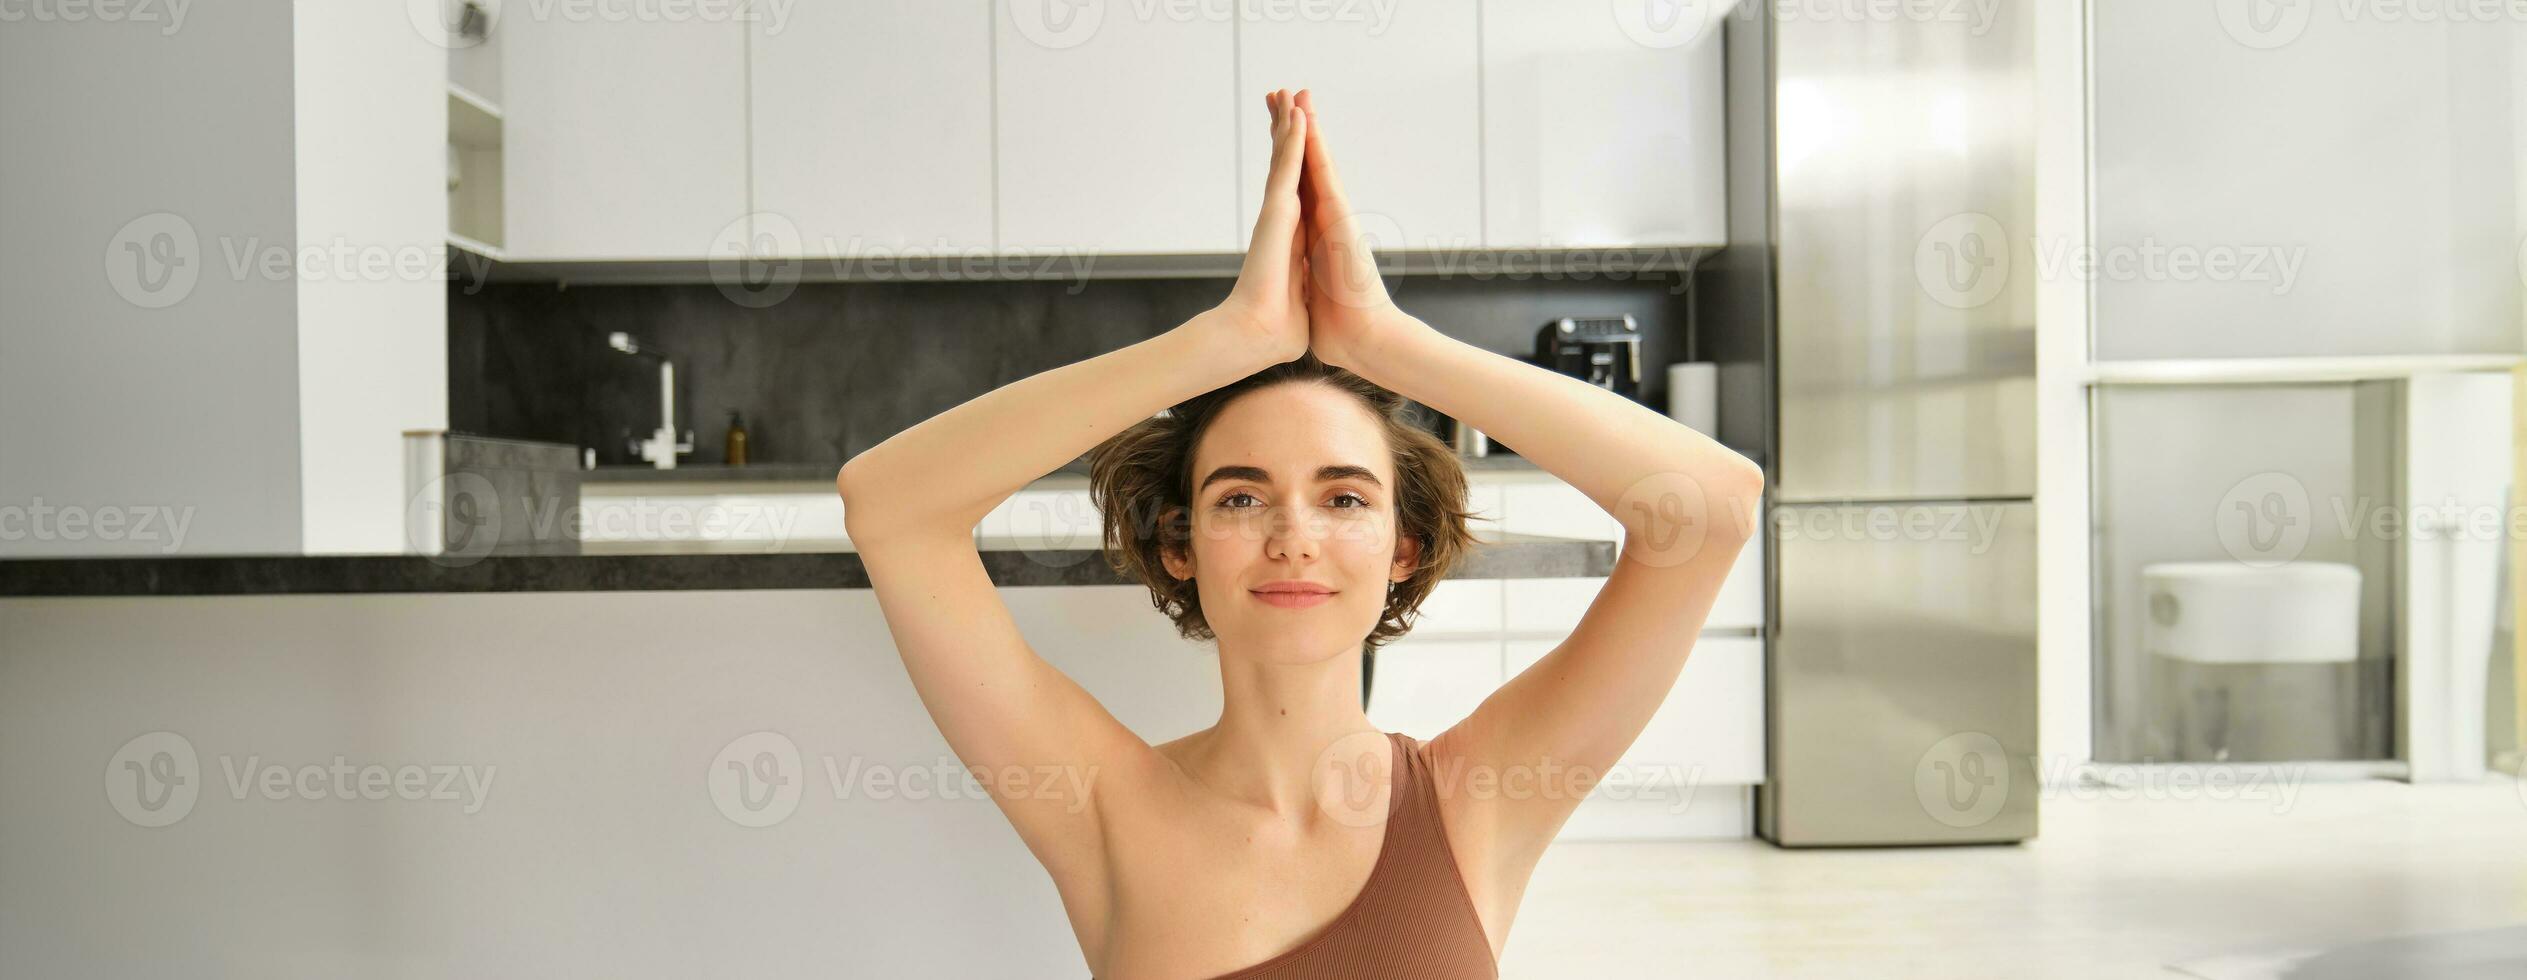 Portrait of fit and healthy woman in sportswear, doing yoga at home on fitness mat, making asana, relaxing and meditating indoors photo